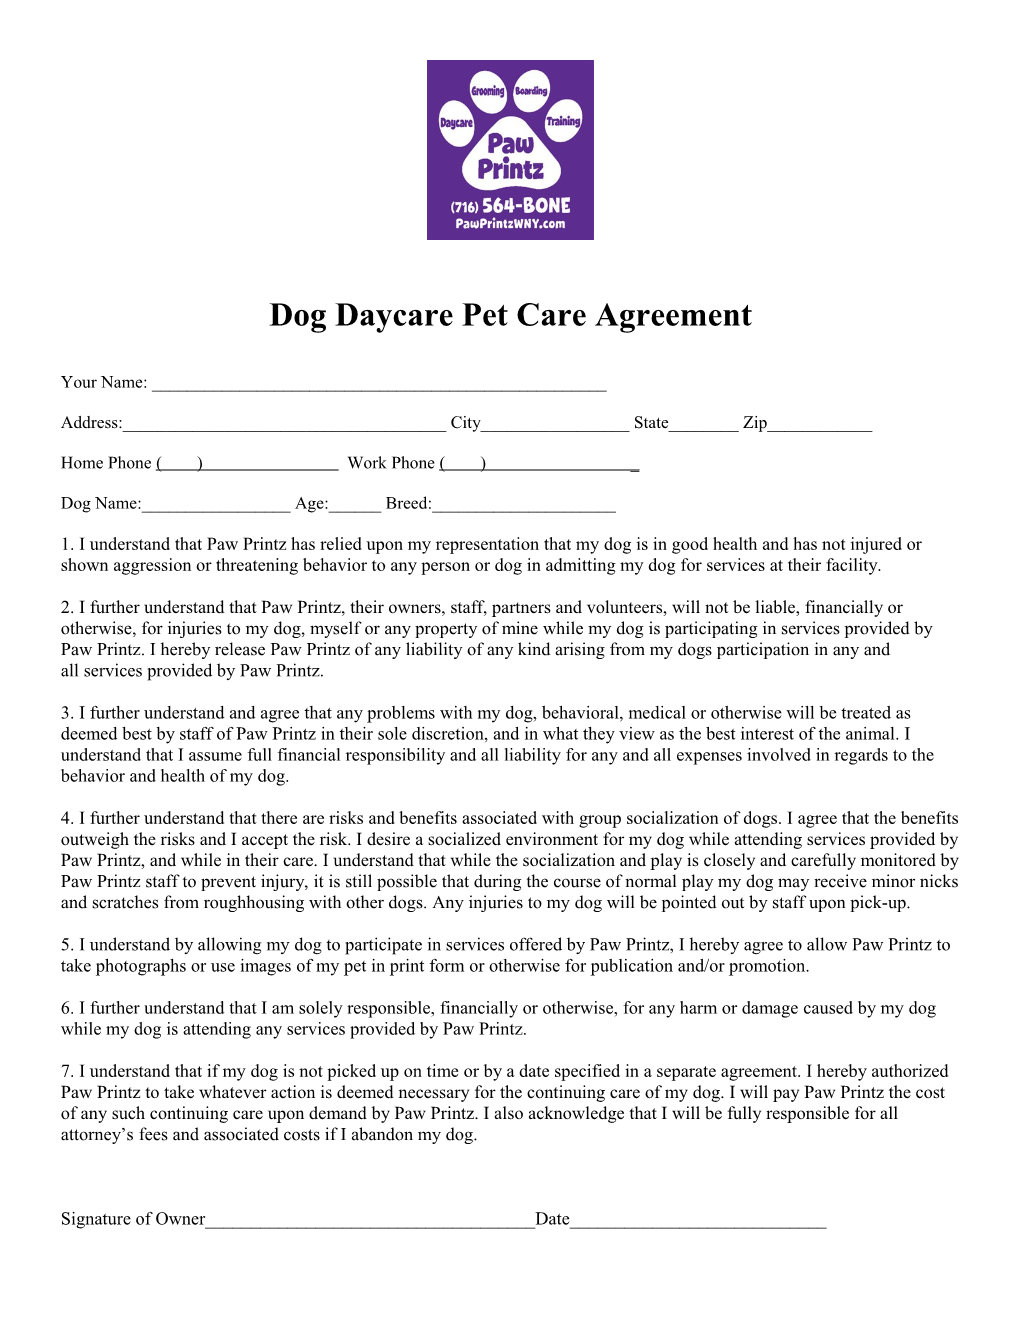 Dog Daycare Pet Care Agreement